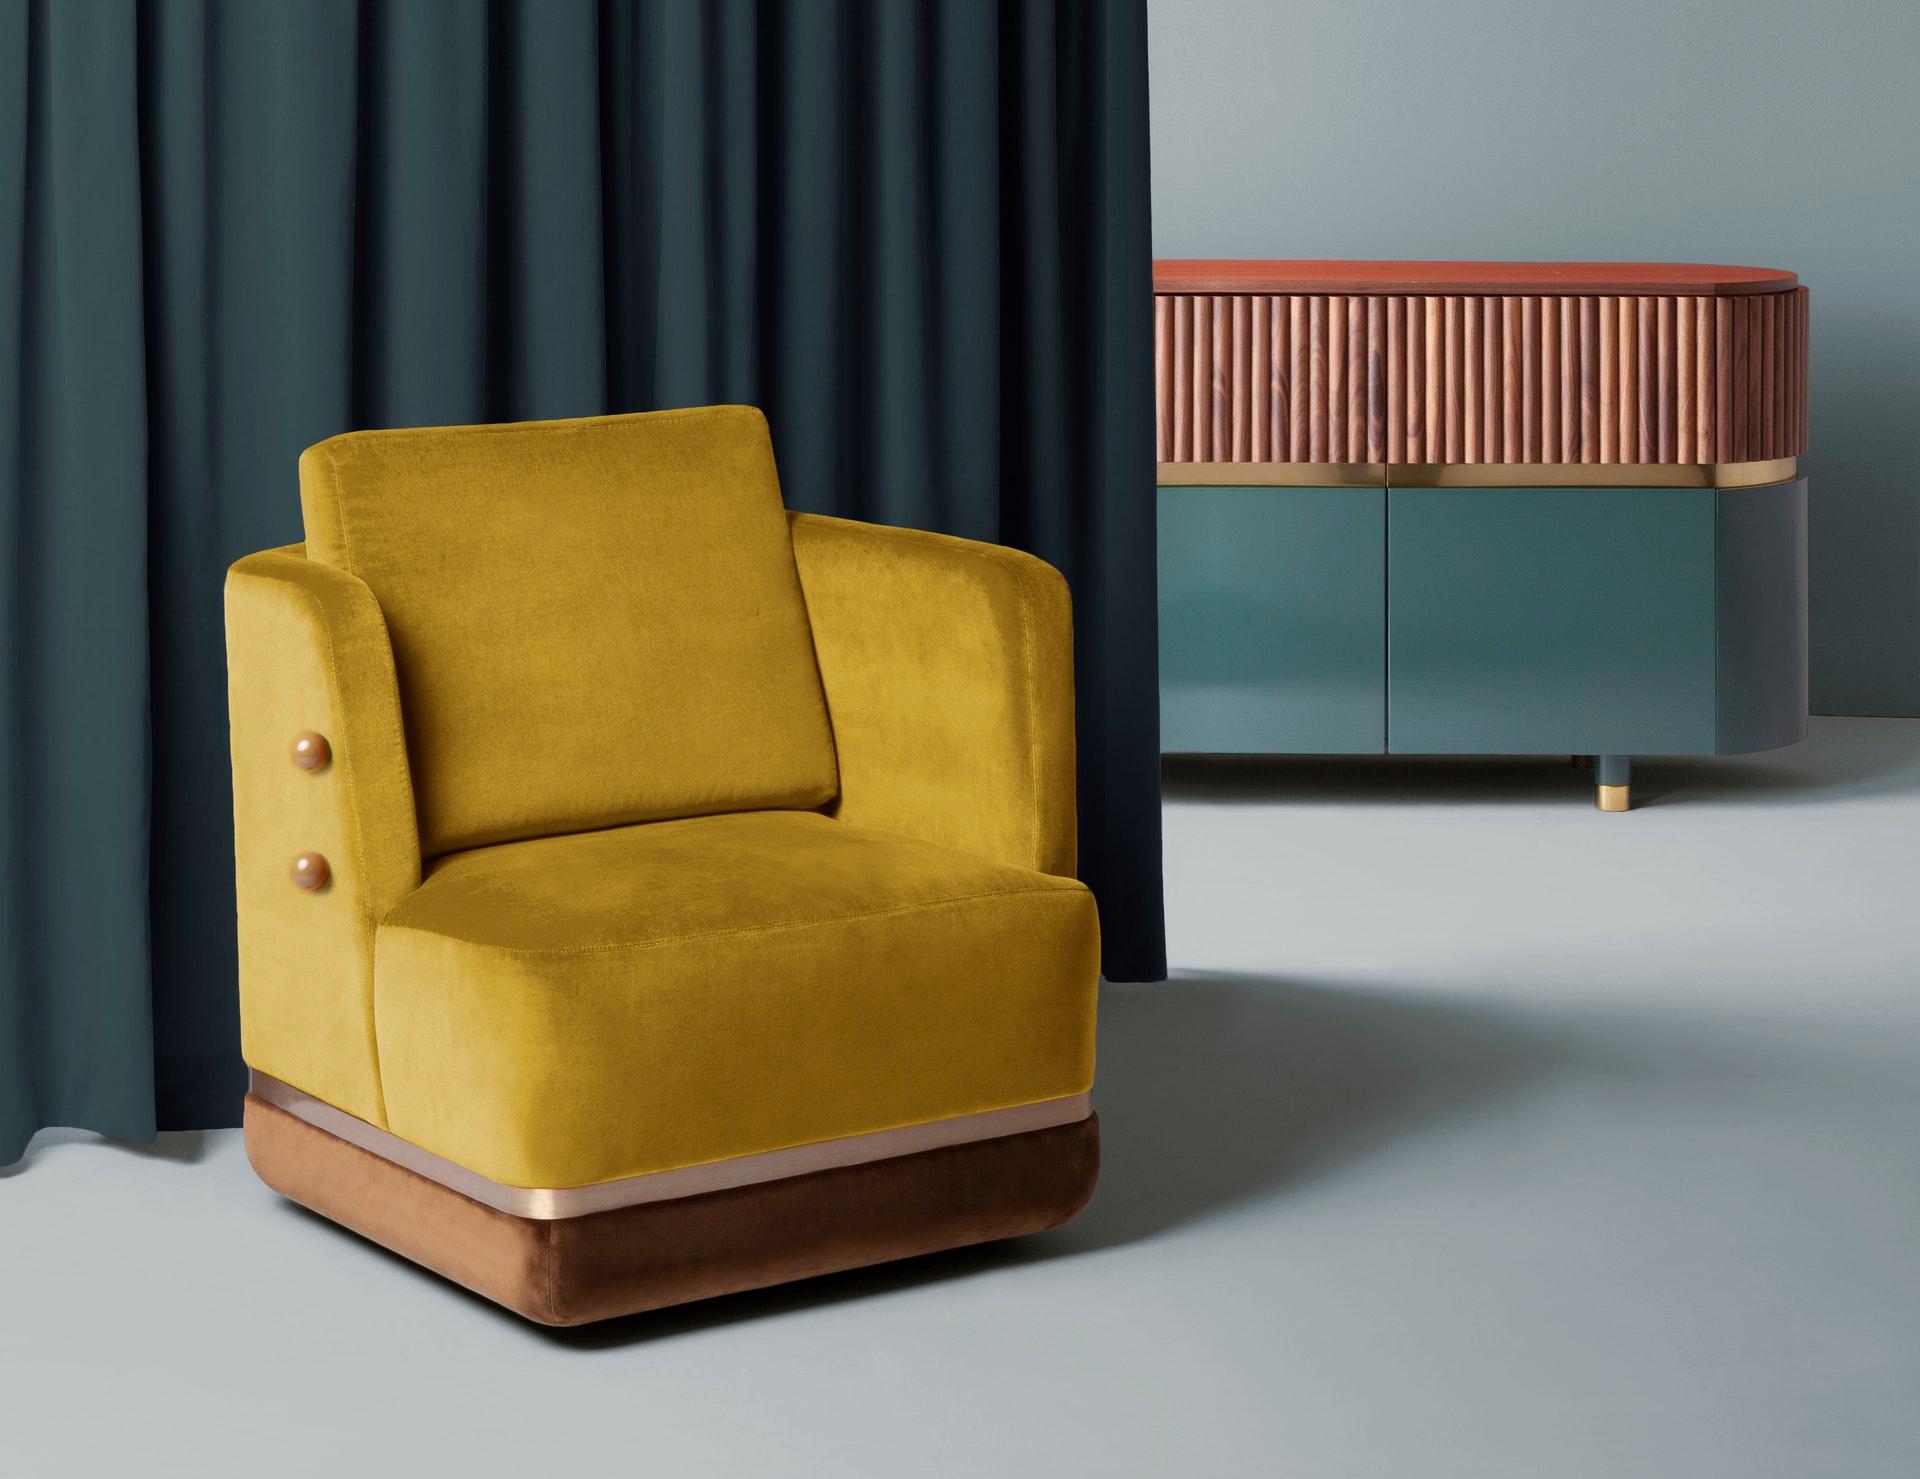 Panorama Armchair by Dooq
Materials: Lacquered MDF, fabric, leather, stainless steel
Dimensions: W 69 x D 73 x H 86 cm


Dooq is a design company dedicated to celebrate the luxury of living. Creating designs that stimulate the senses, whose